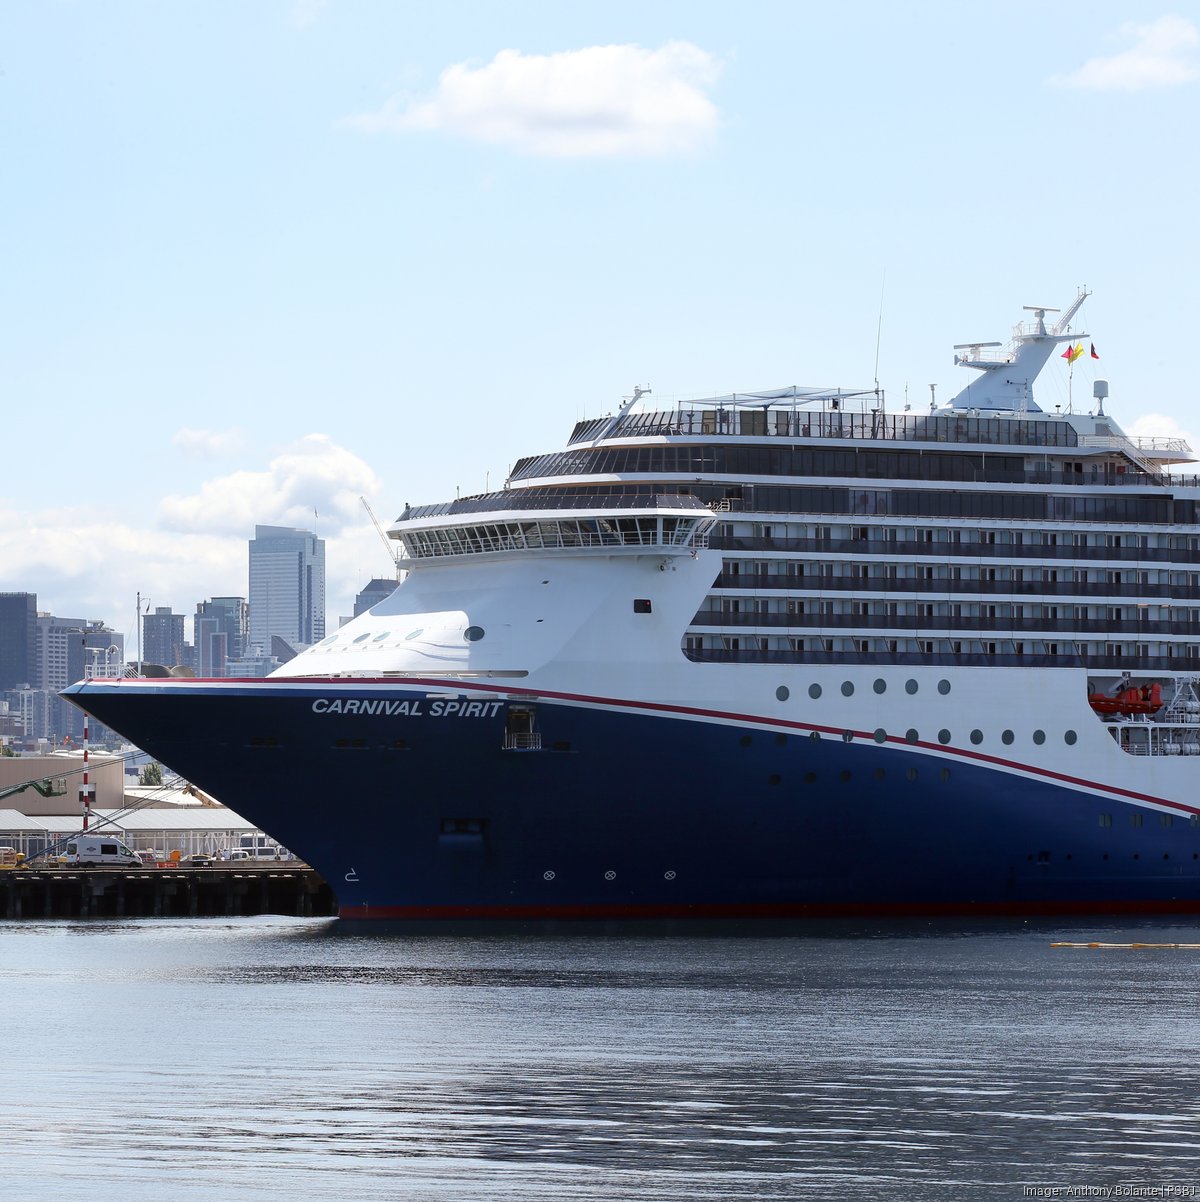 Carnival Doubles Price for a Popular Pre-Cruise Purchase